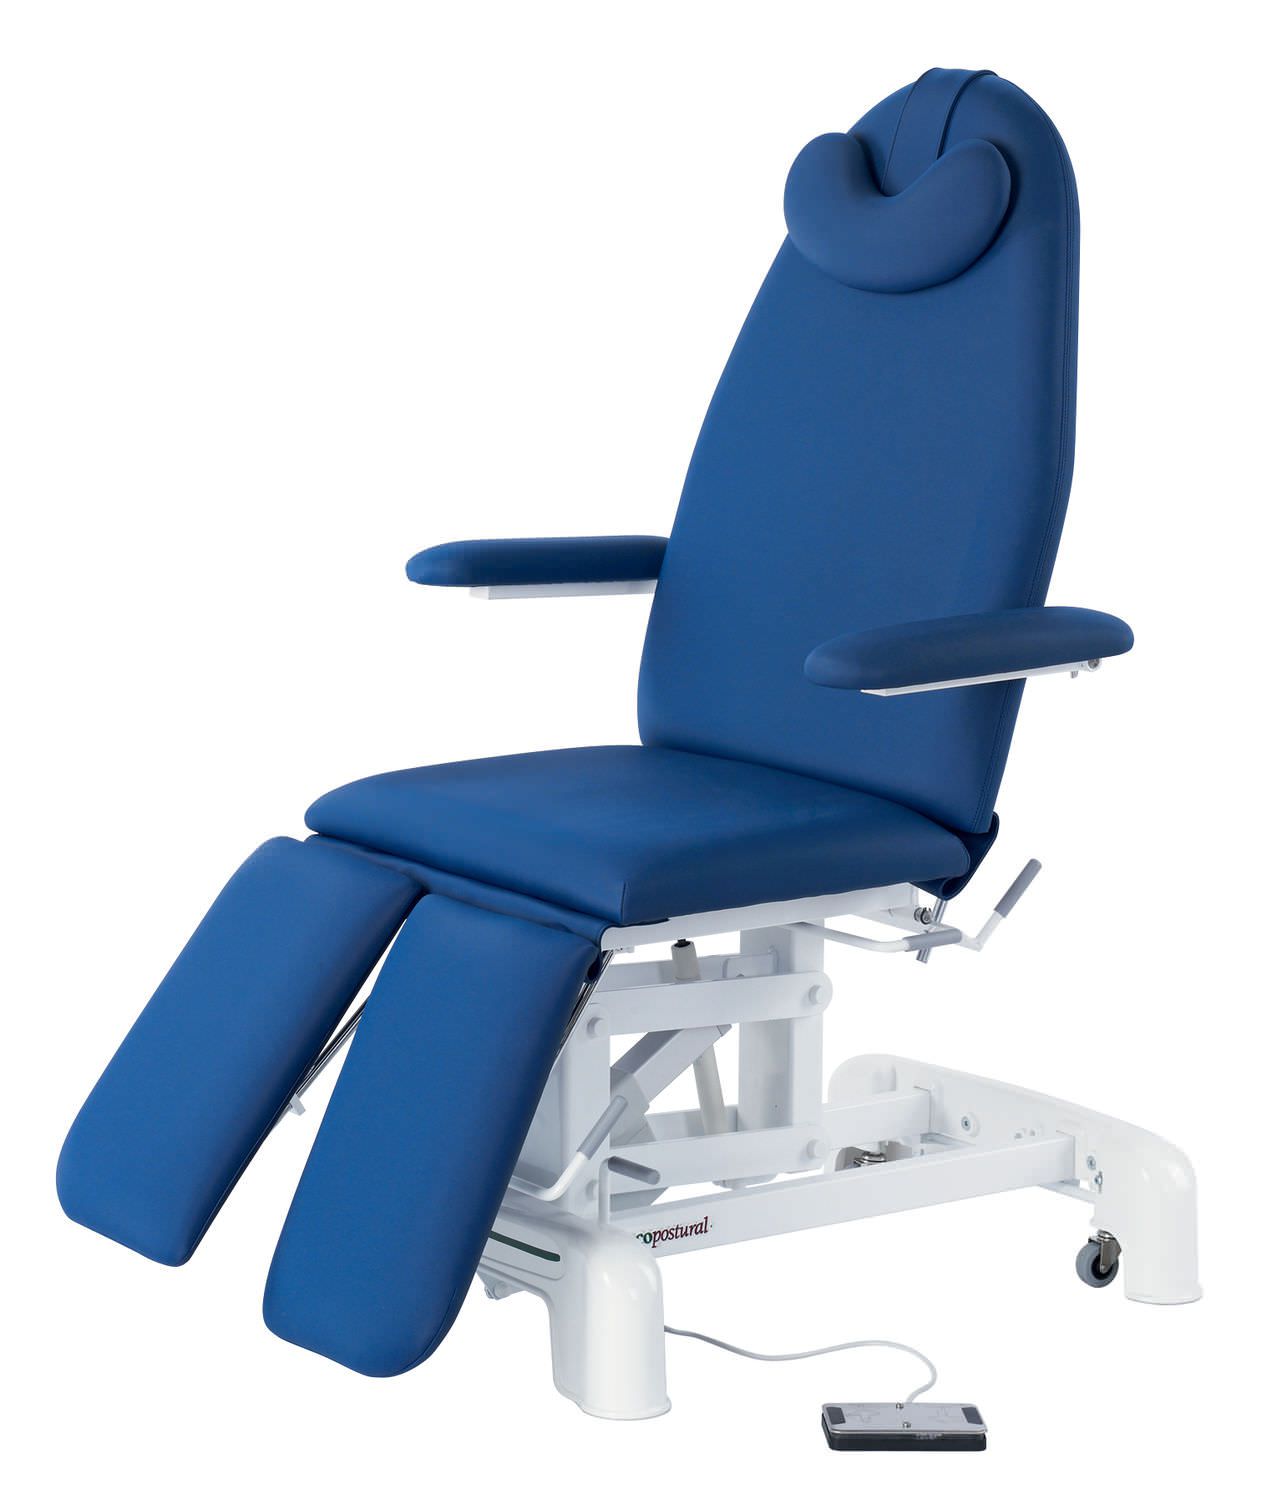 Podiatry examination chair / electrical / height-adjustable / 3-section C-3567-M44 Ecopostural